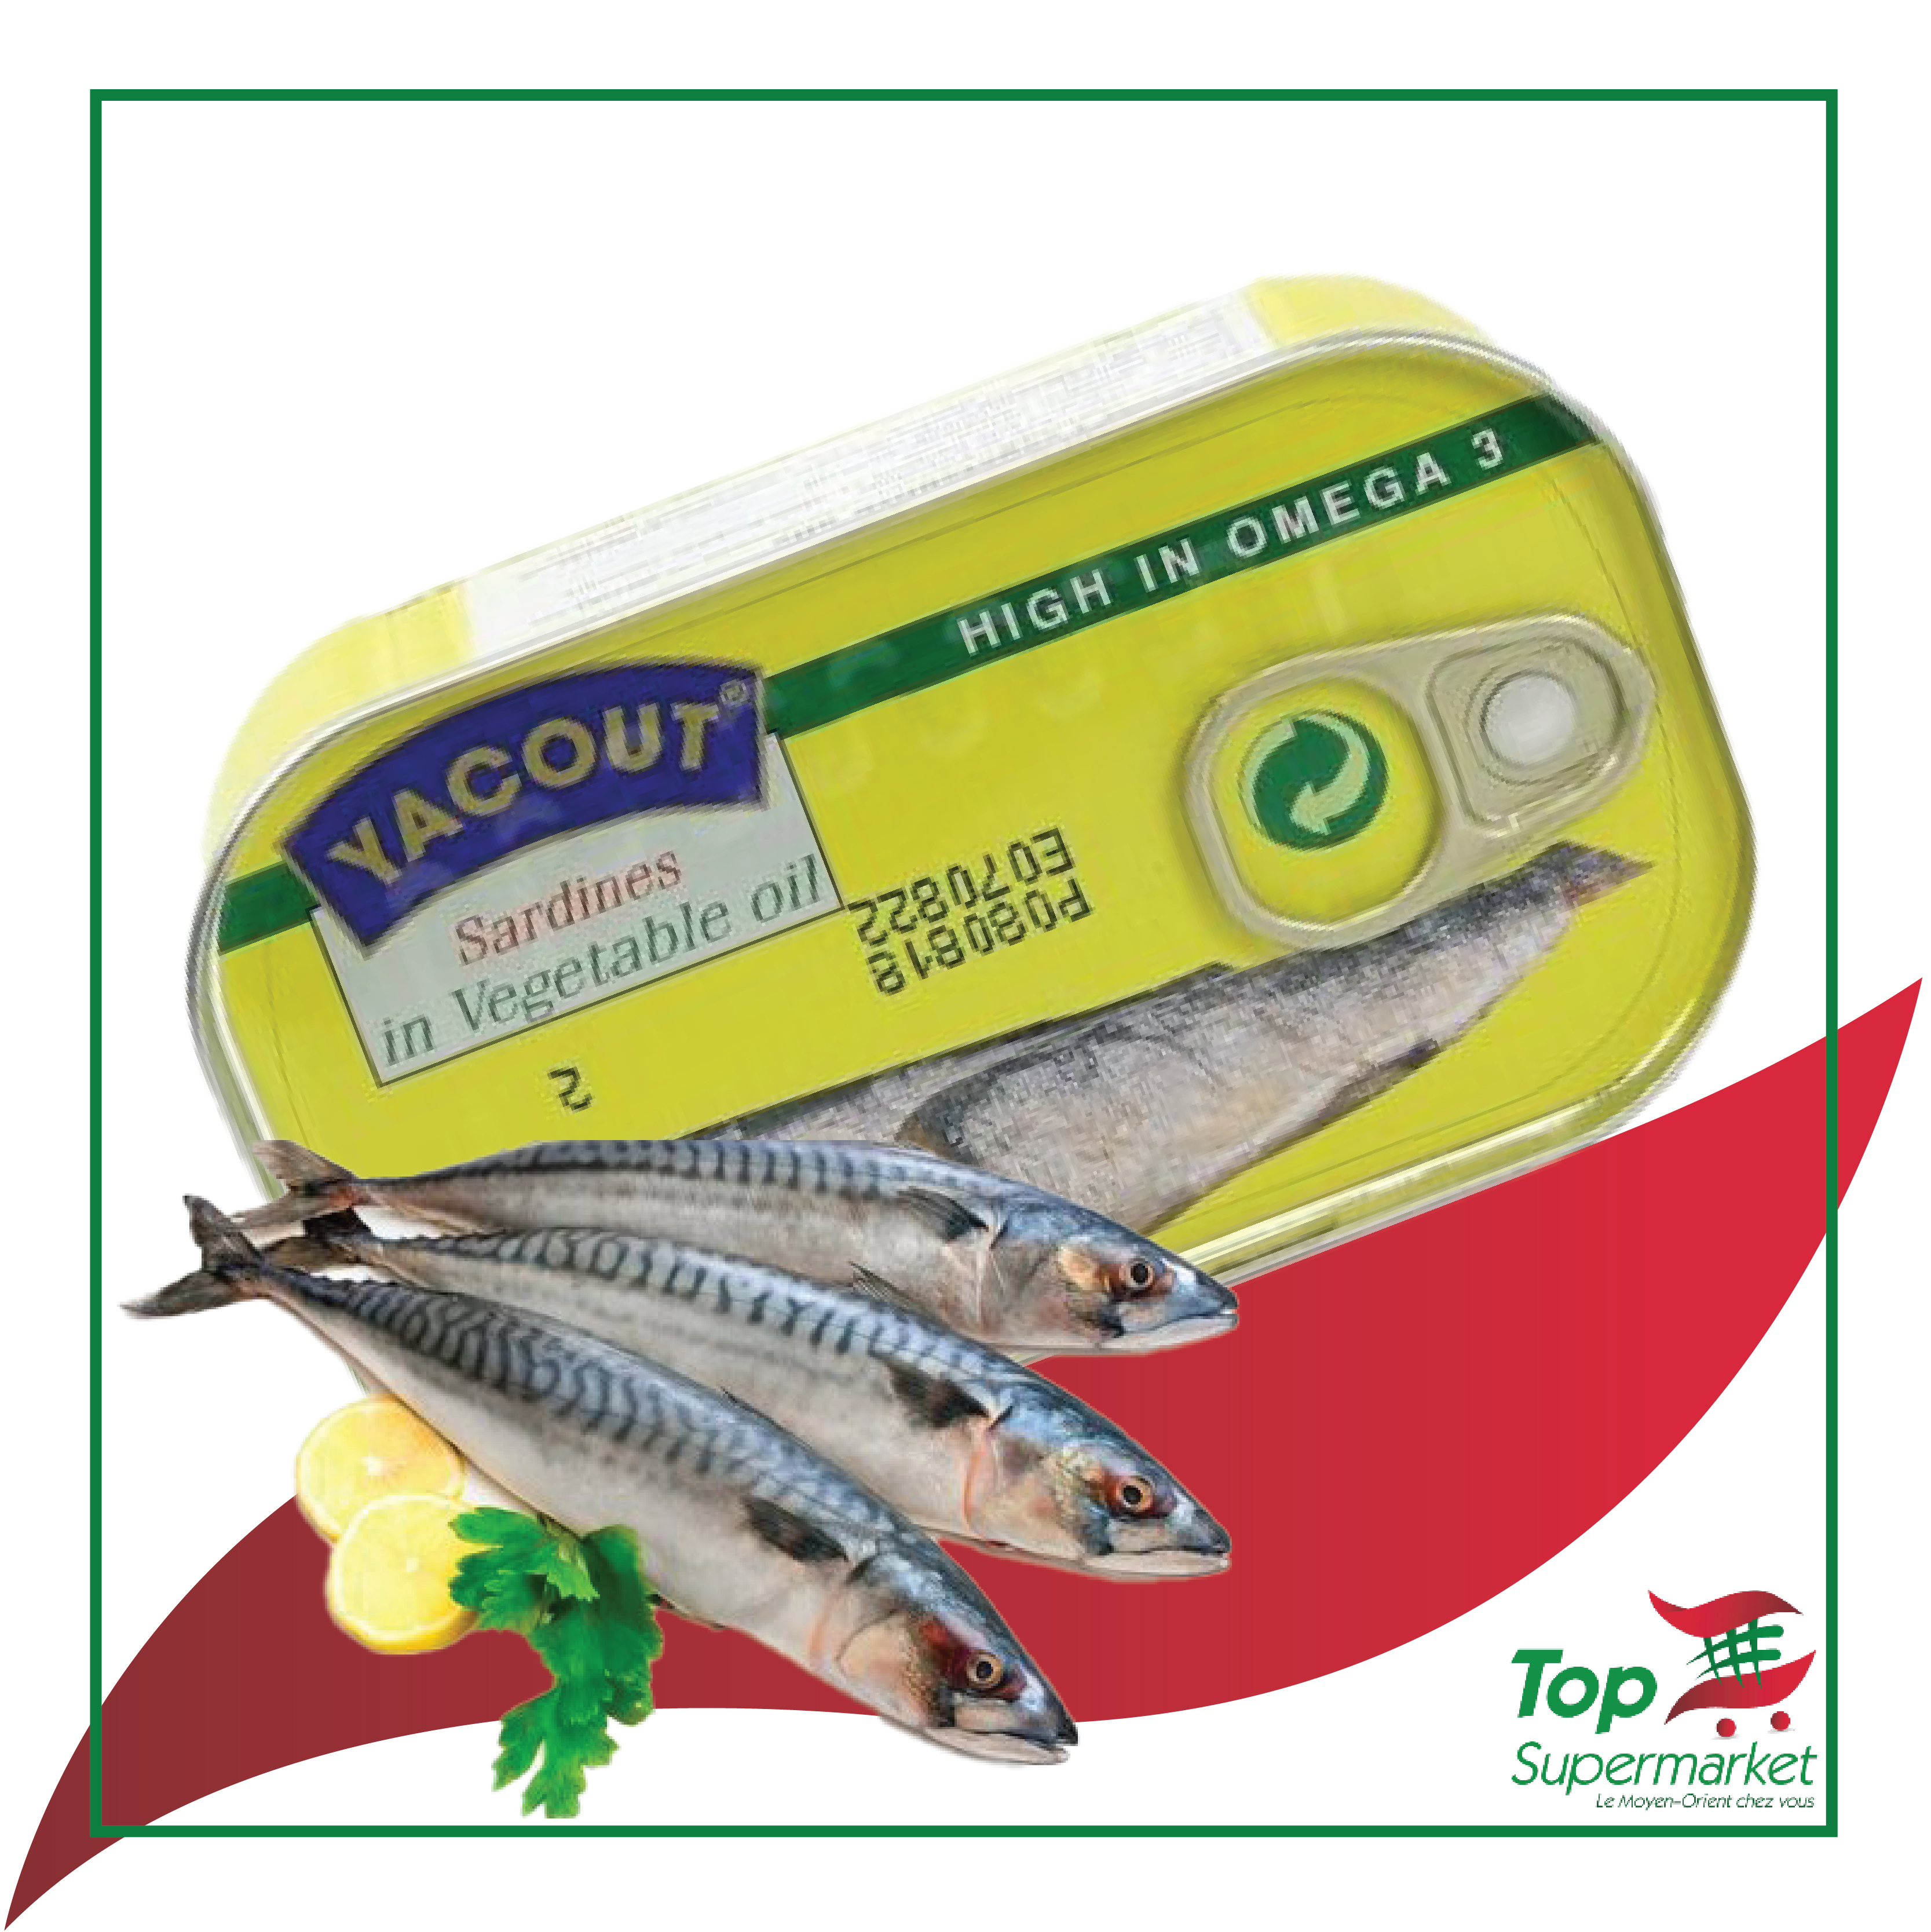 Yacout sardines 125gr